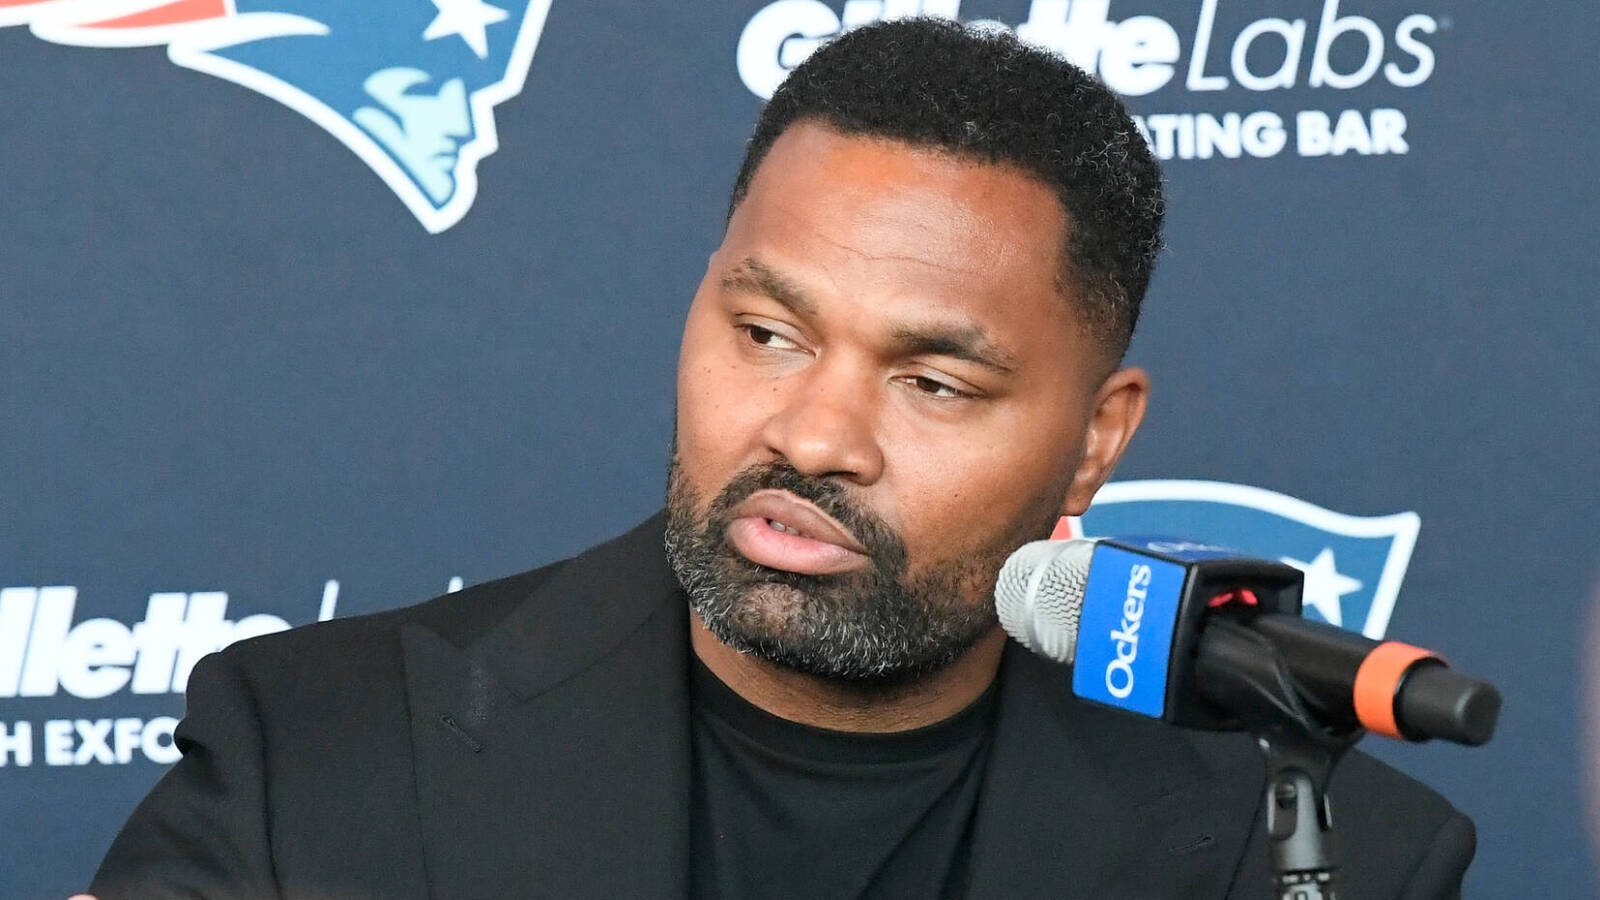 Patriots' Jerod Mayo hints he'll handle QBs differently than Bill Belichick